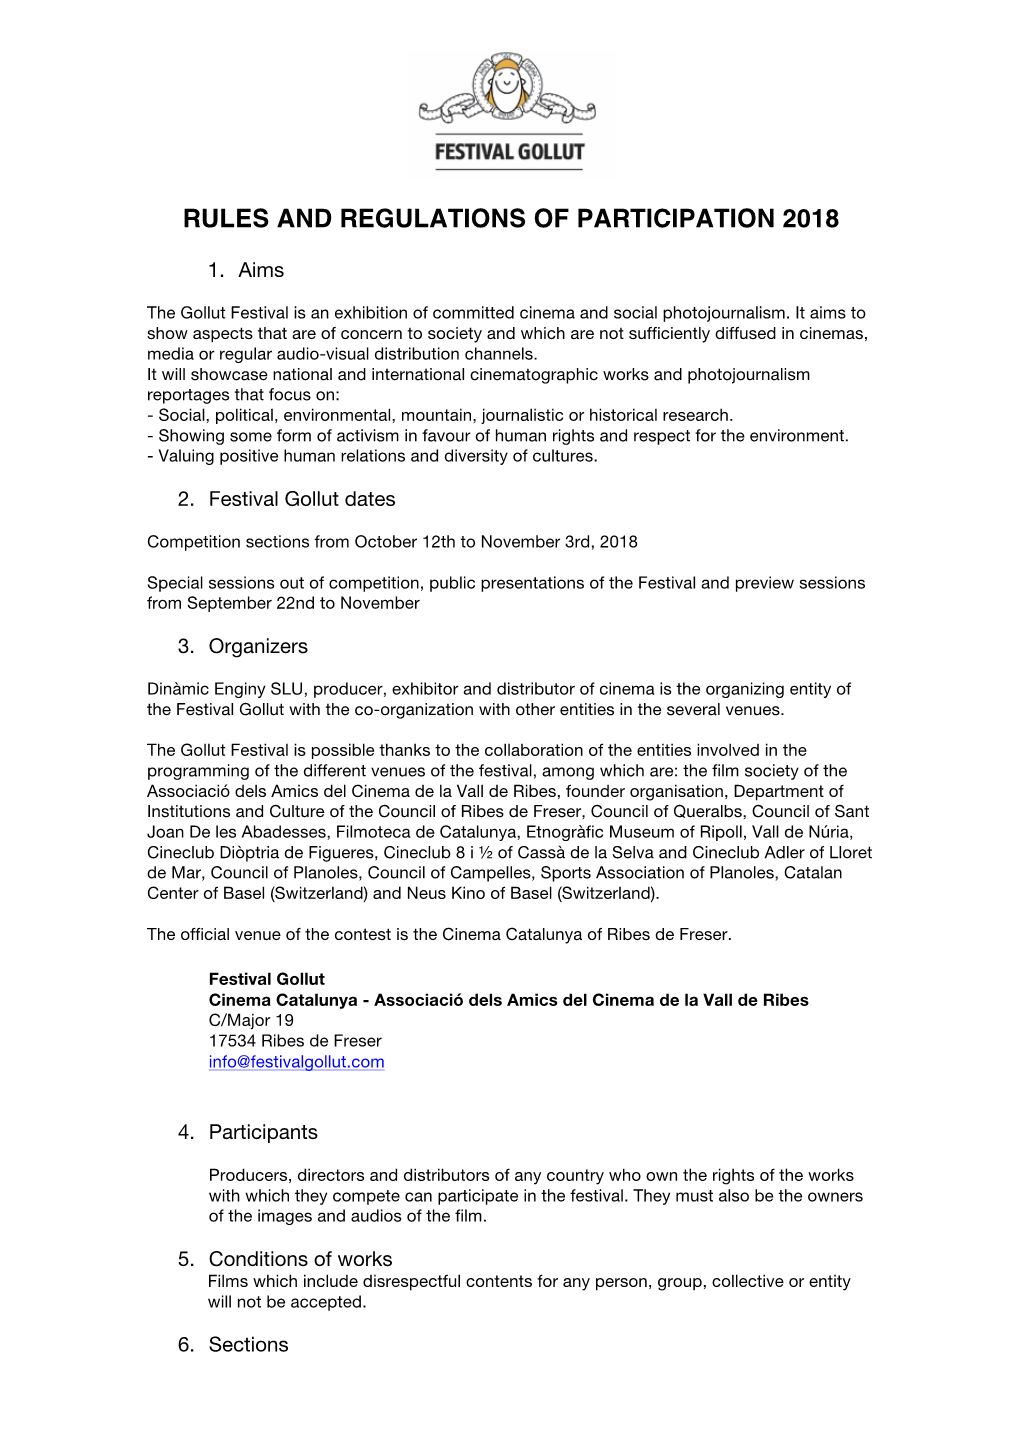 Rules and Regulations of Participation 2018